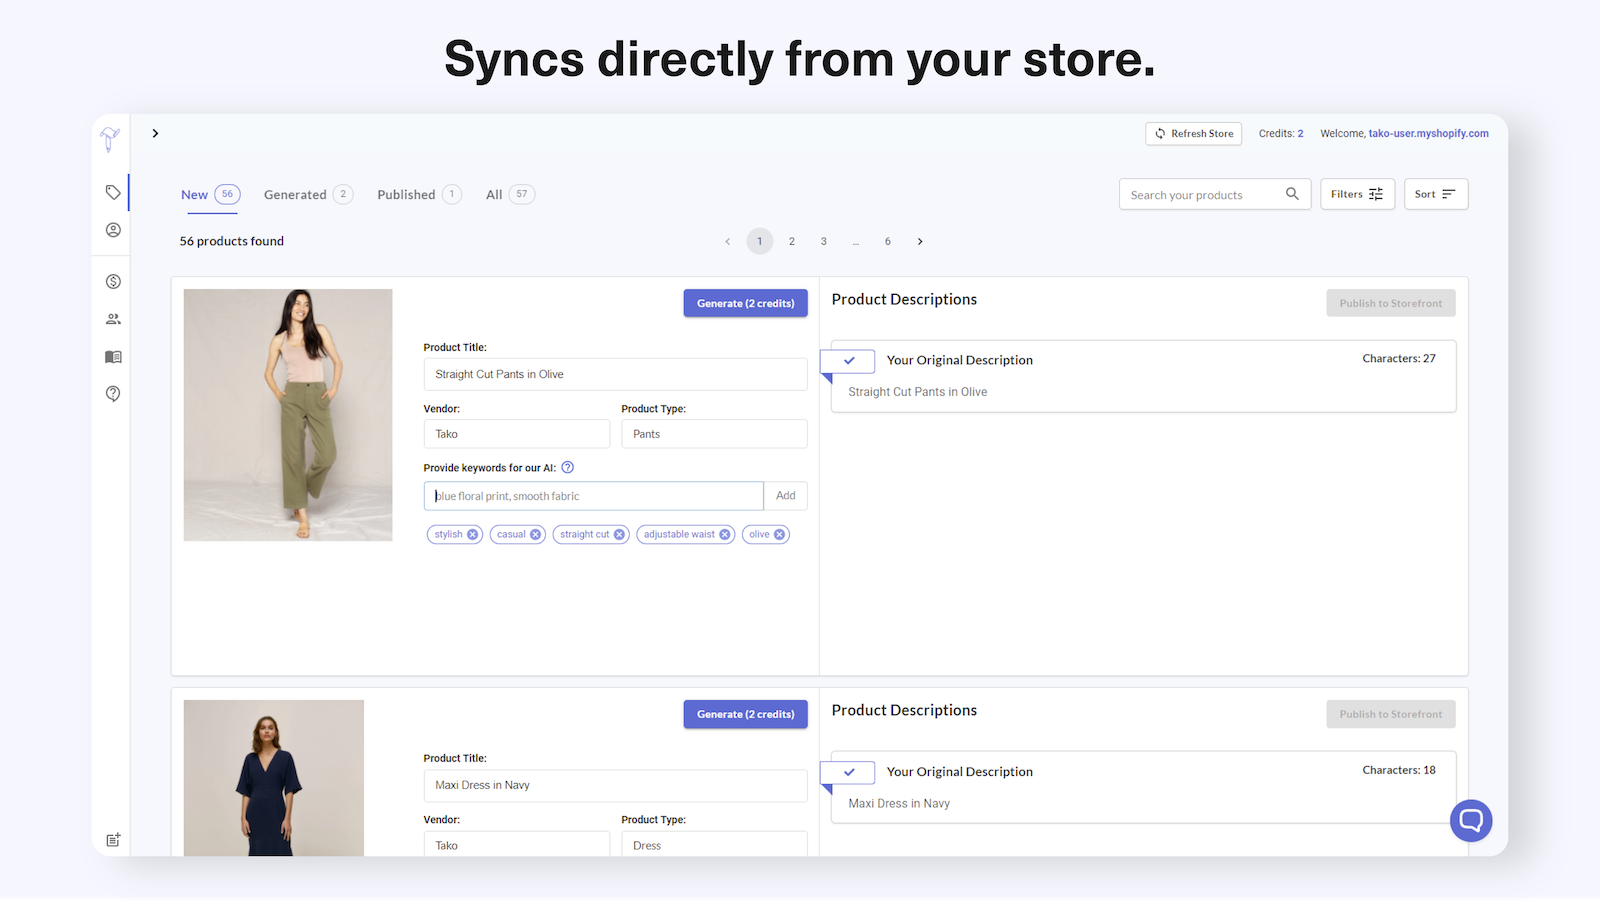 Sync your product catalog directly from your store